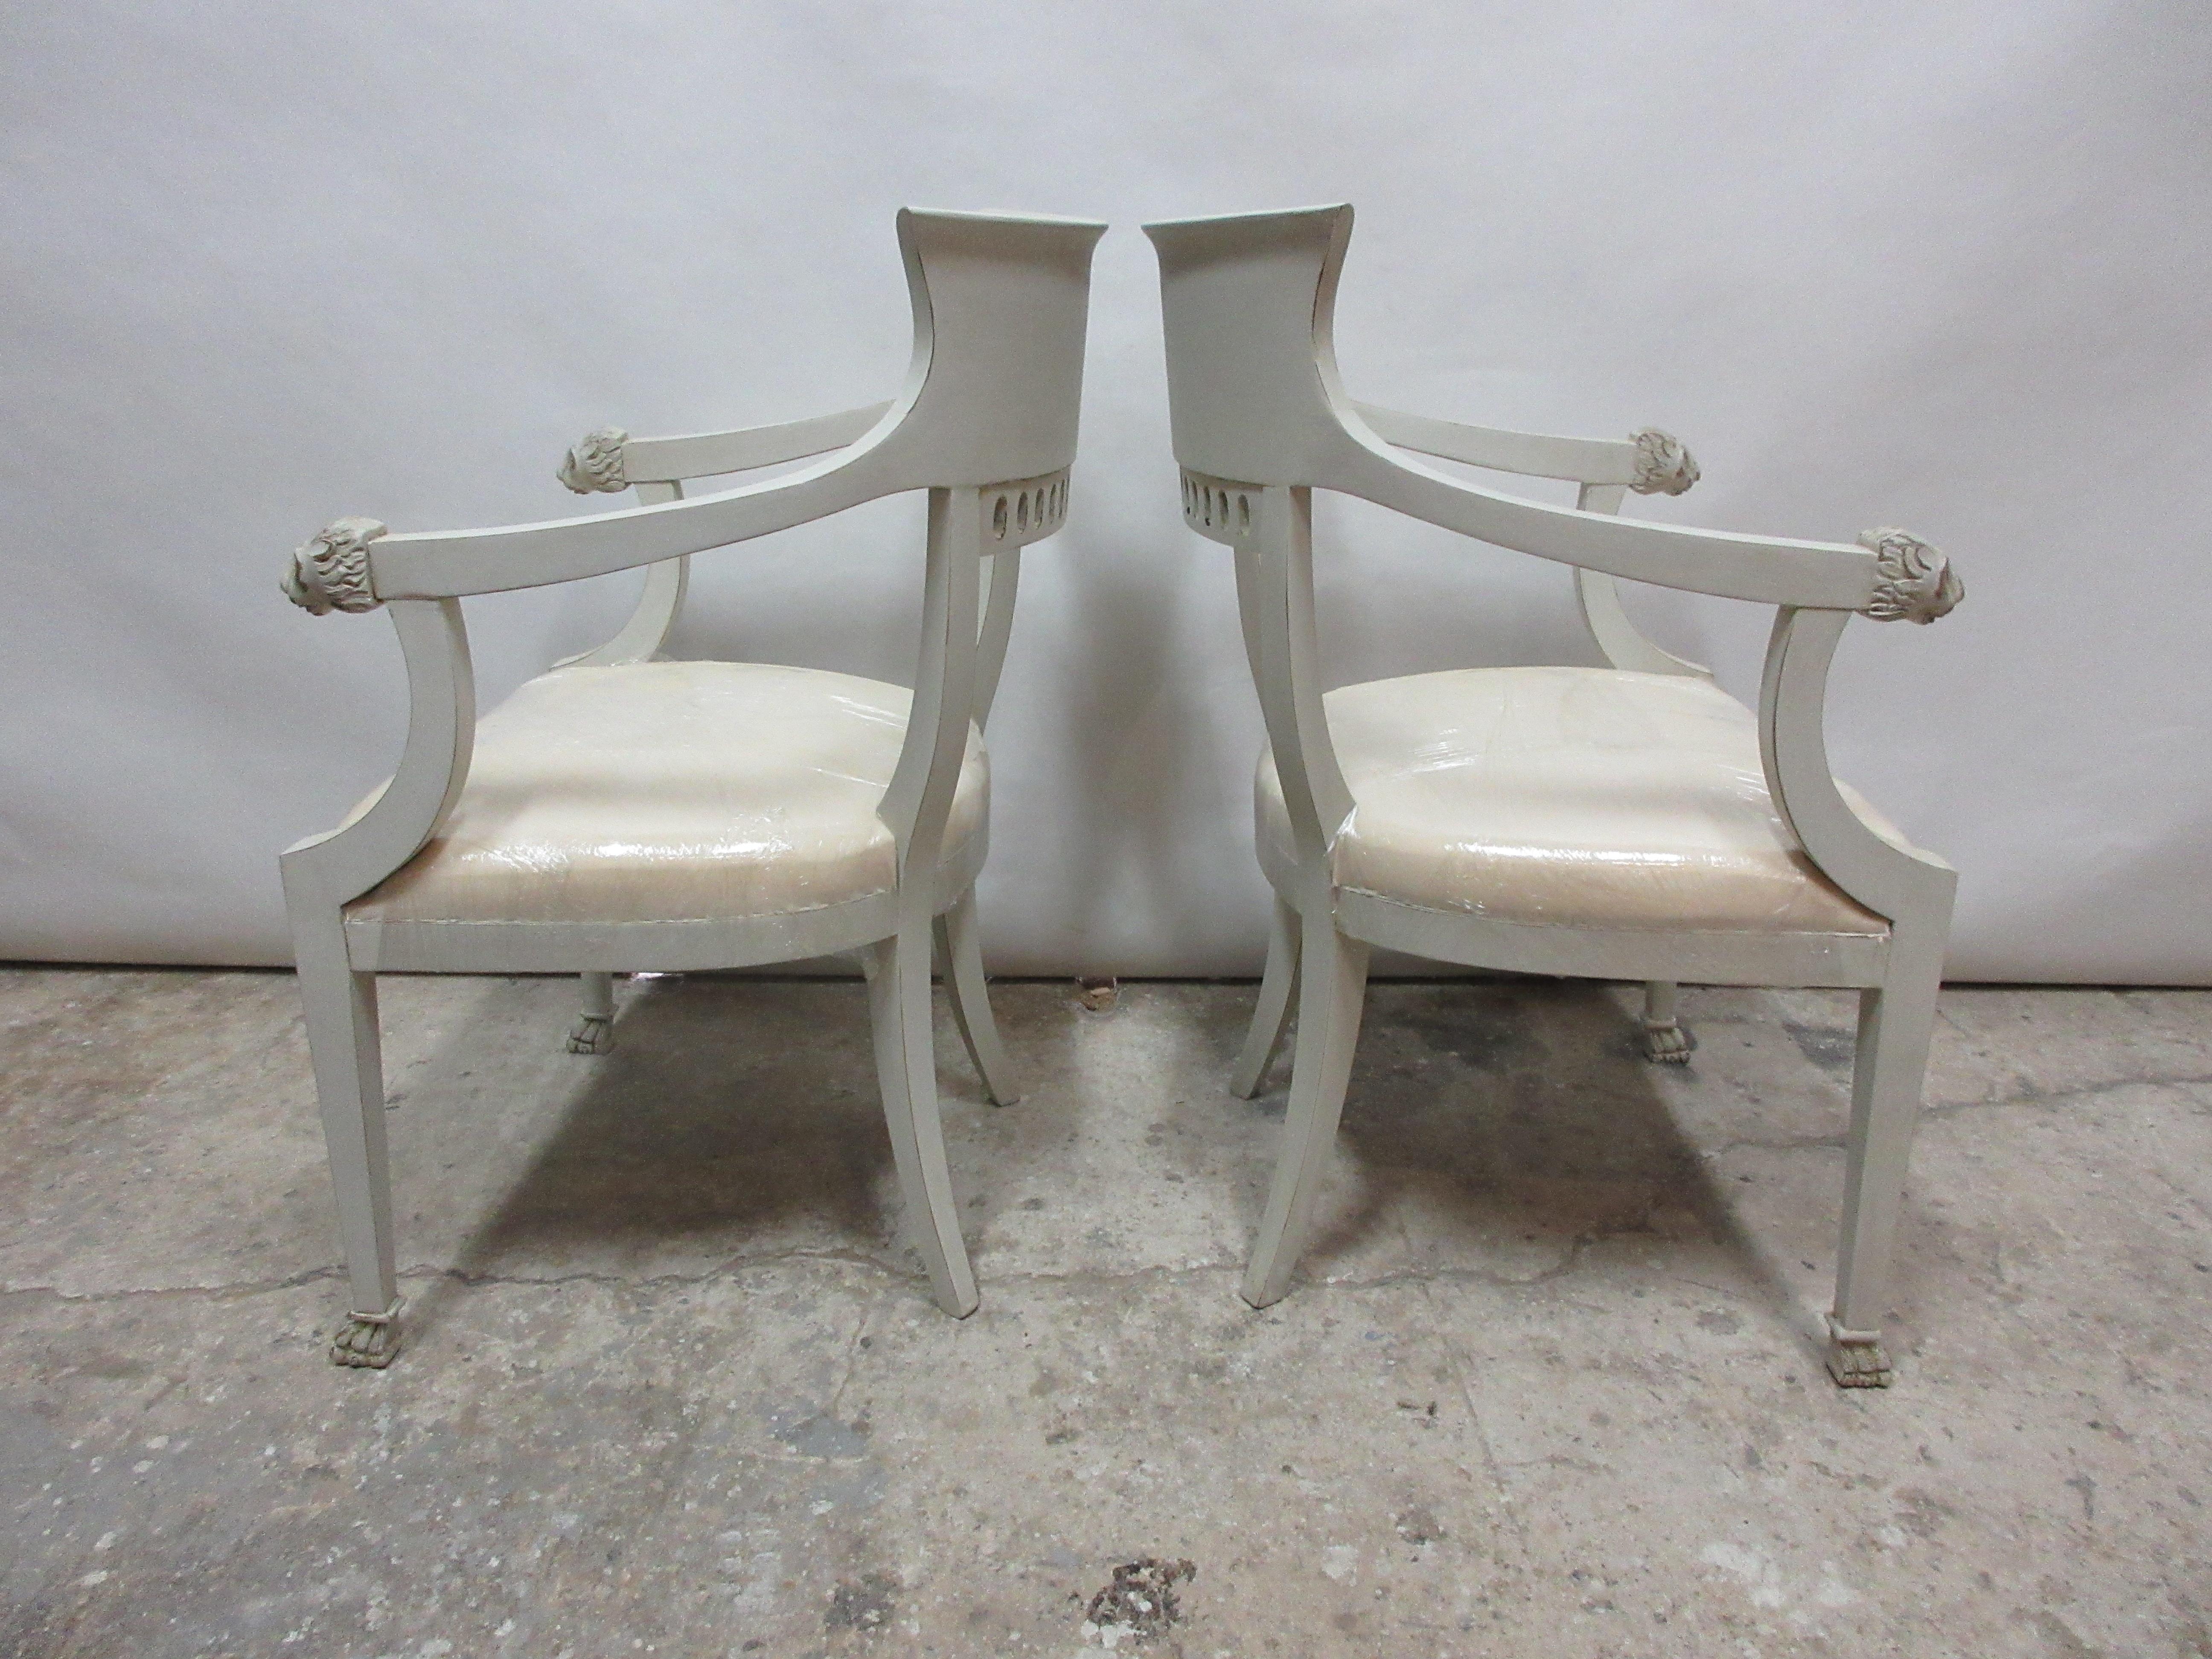 This is a set of 2 Gustavian style lion head chairs, they have been restored and repainted with milk paints 